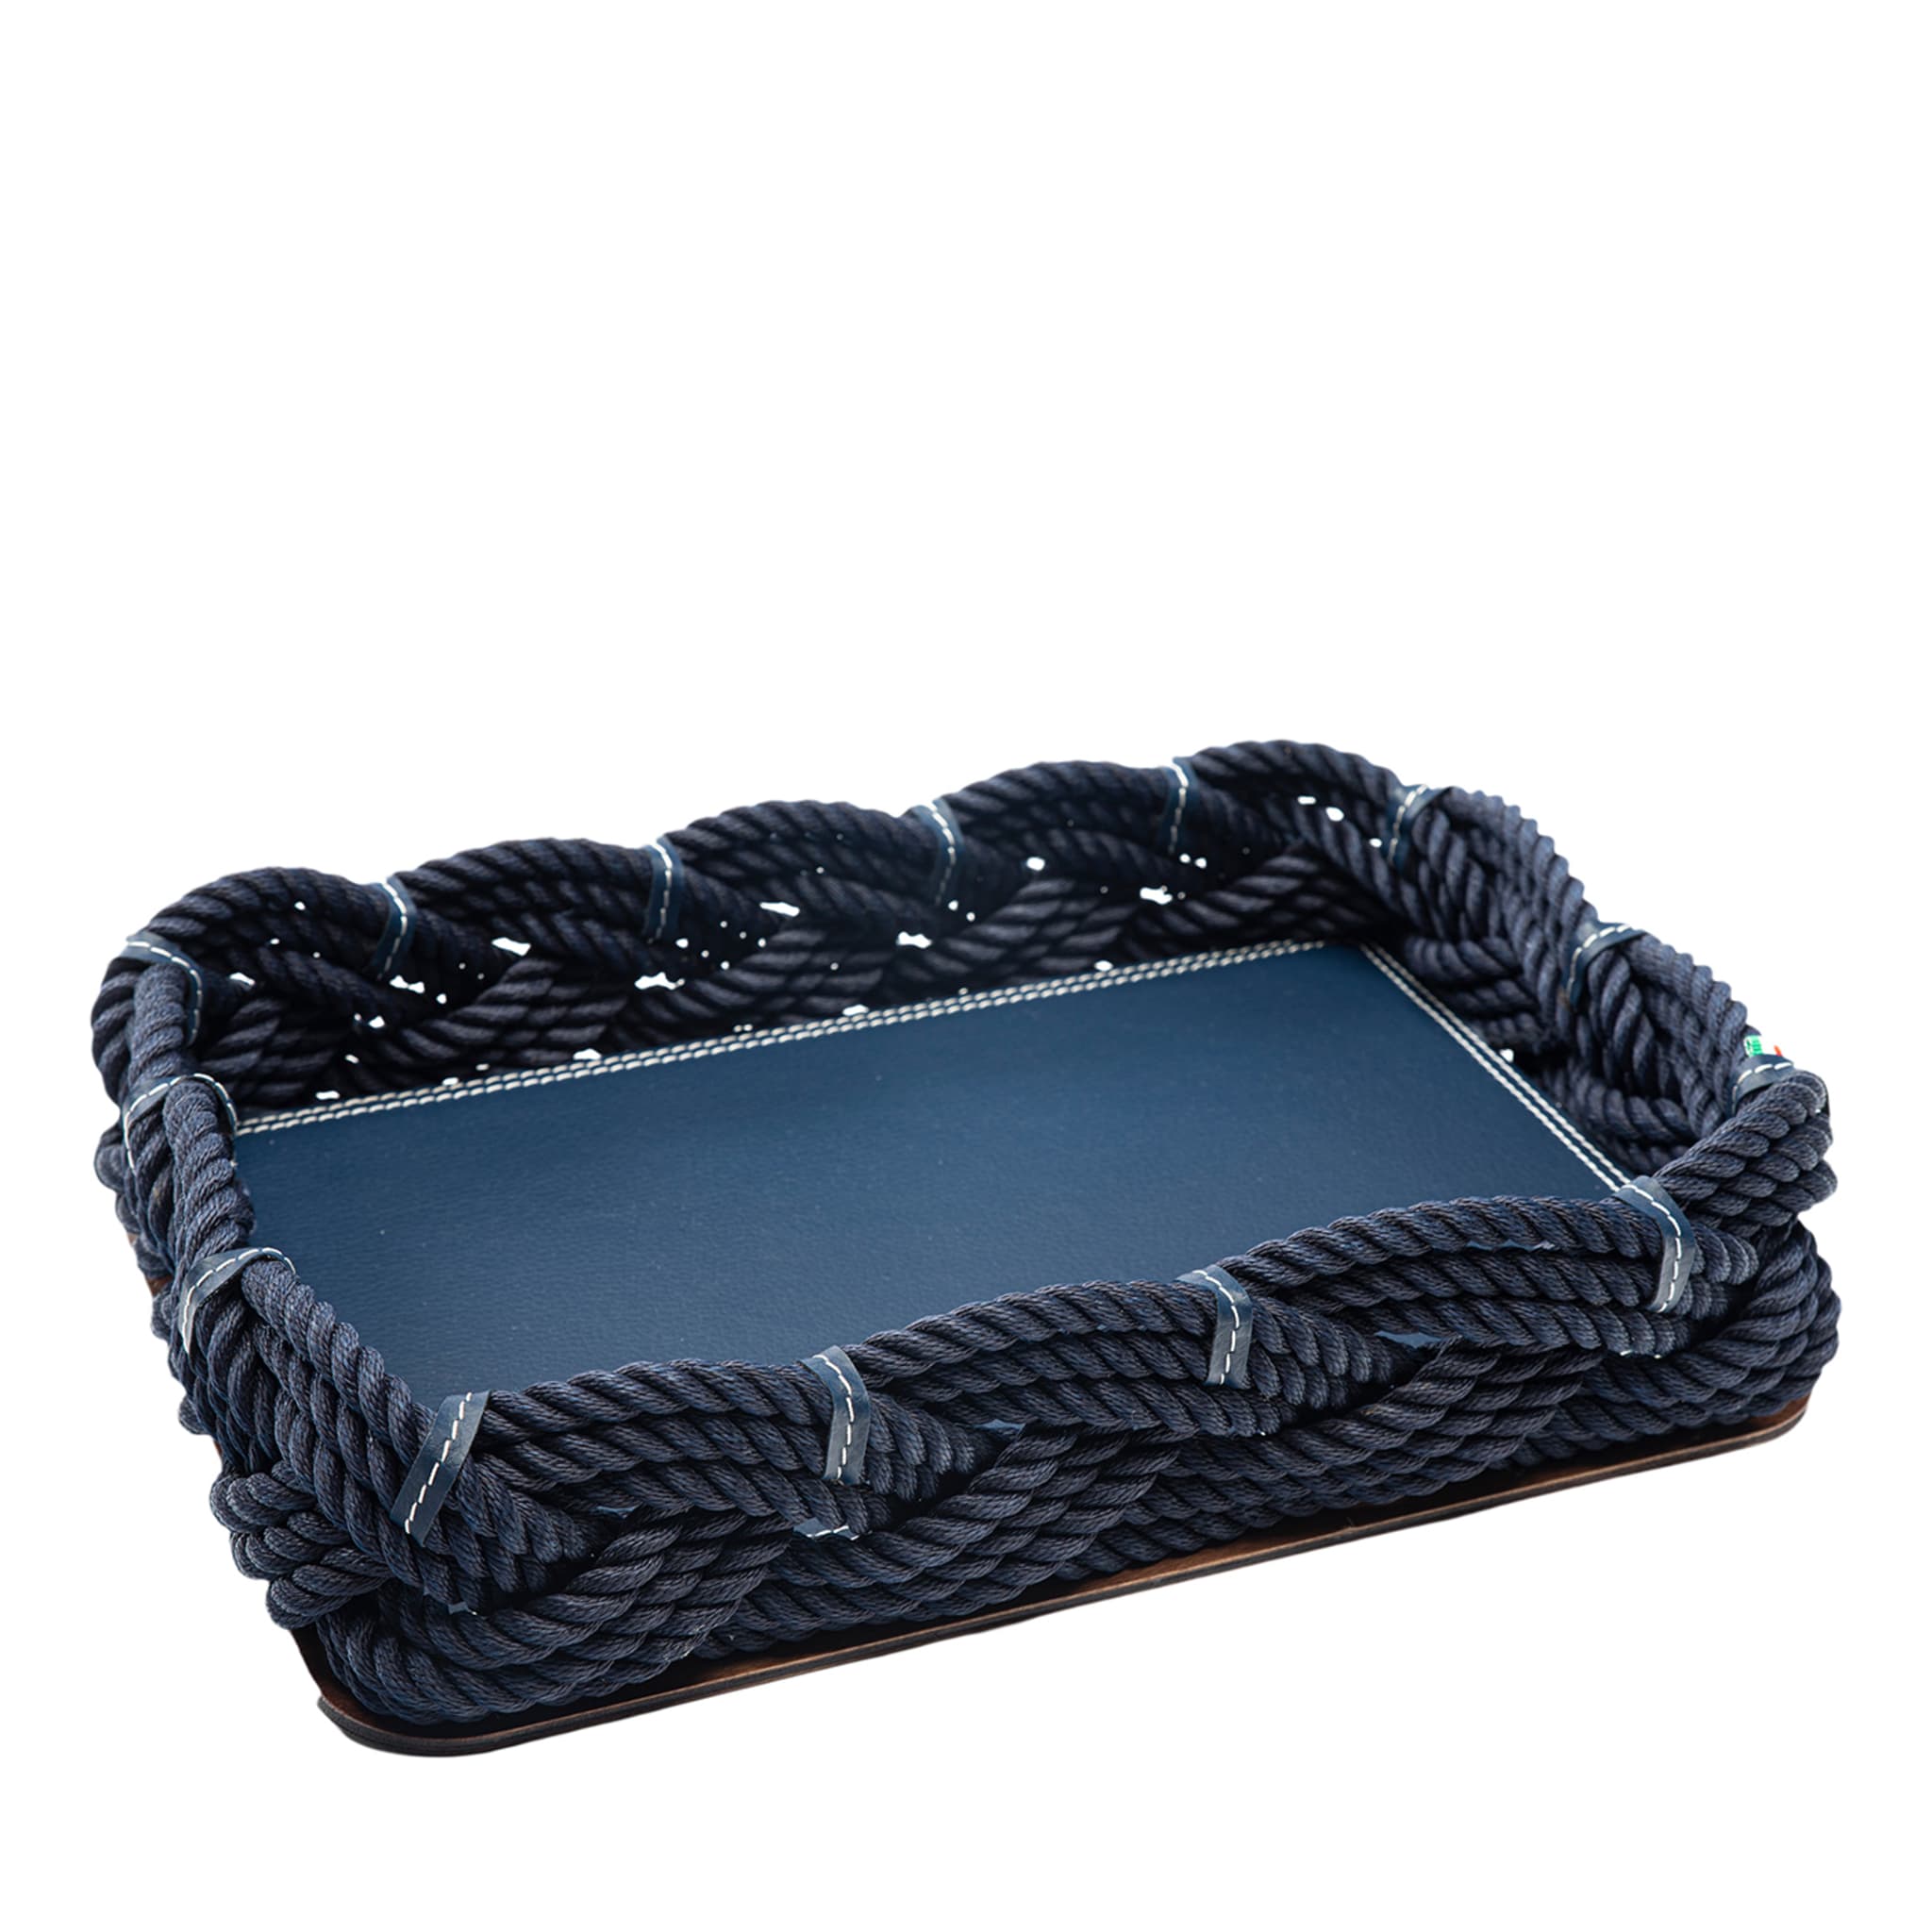 Rectangular Blue Eco-Leather & Rope Centerpiece - Main view